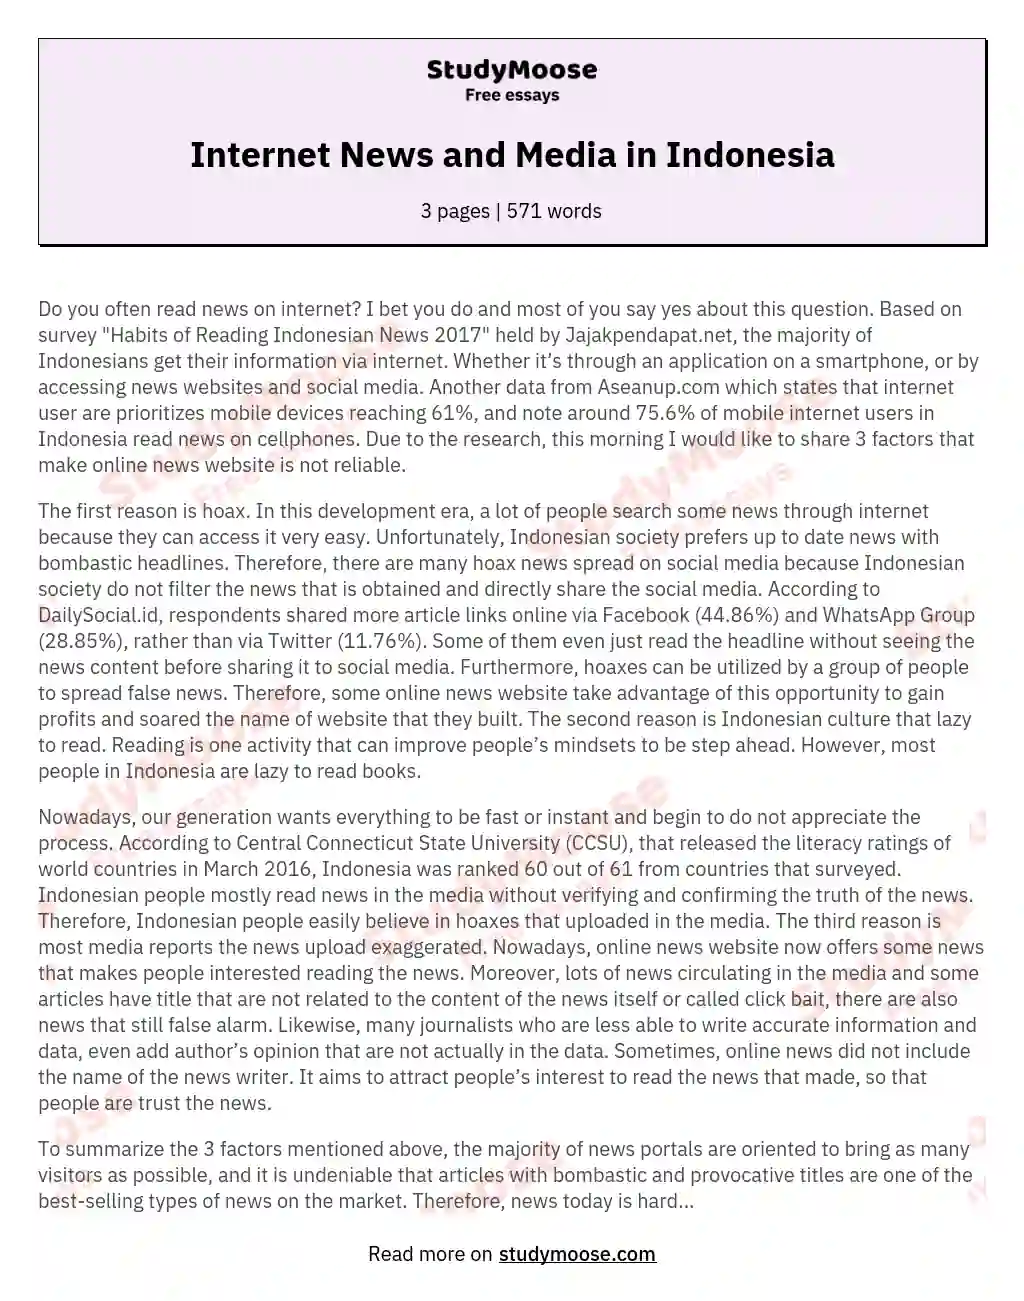 Internet News and Media in Indonesia